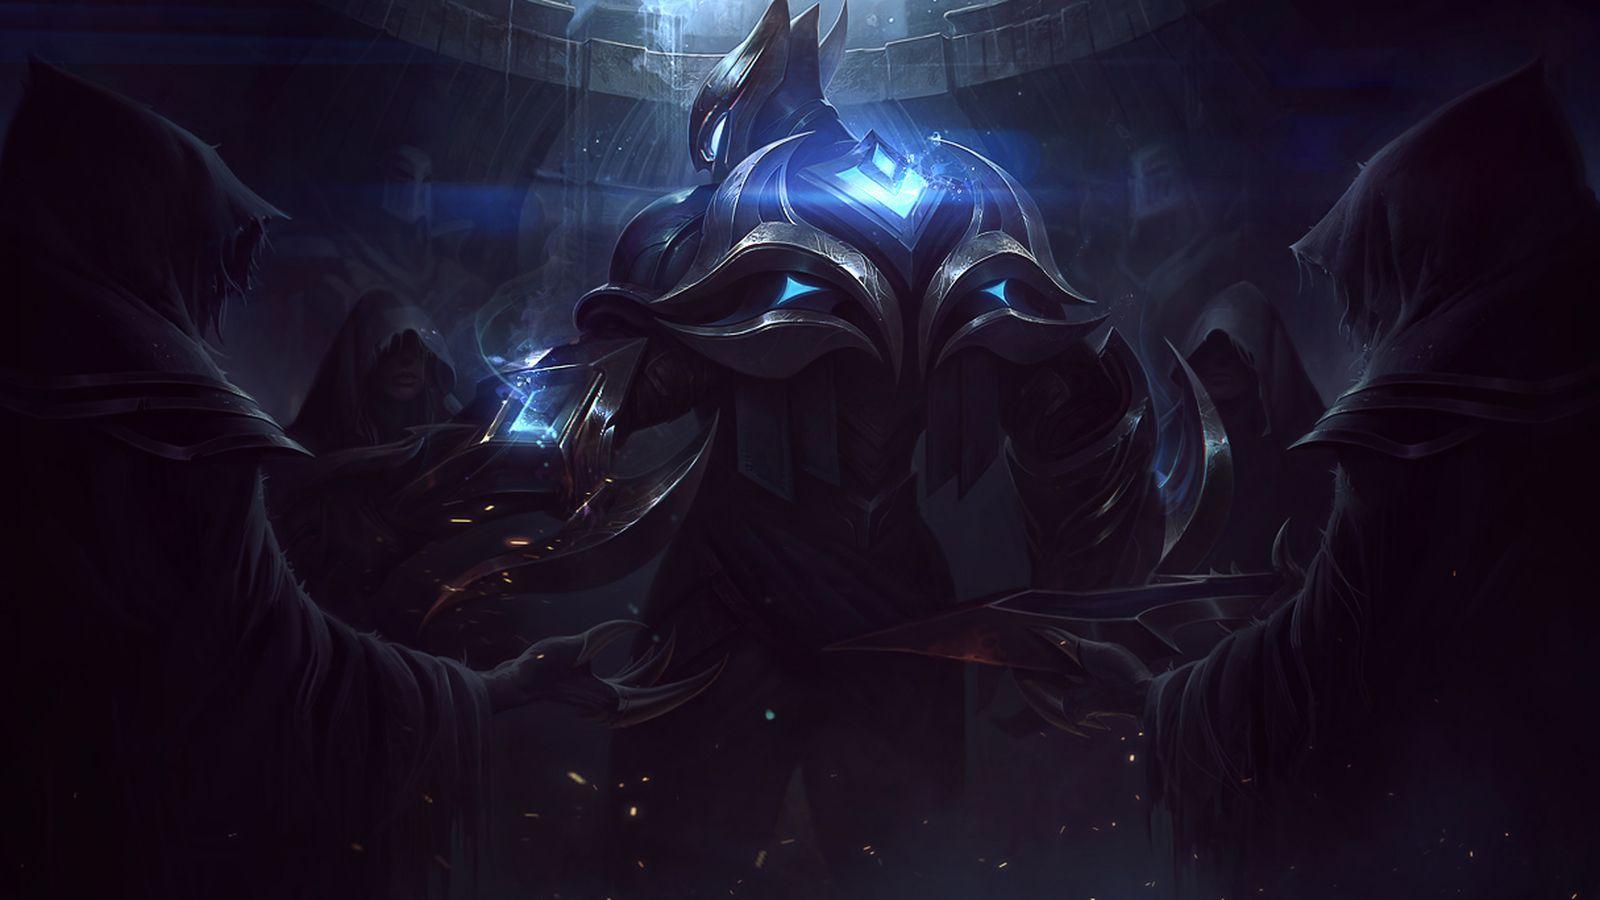 Featured image of post Lol Wallpaper Hd 1280X1024 Download 720x1280 wallpaper swain league of legends game dragons samsung galaxy mini s3 s5 neo alpha sony xperia compact z1 z2 z3 asus zenfone 720x1280 hd image background enhance your battlefield strategy for lol league of legends with champion build guides at elohell